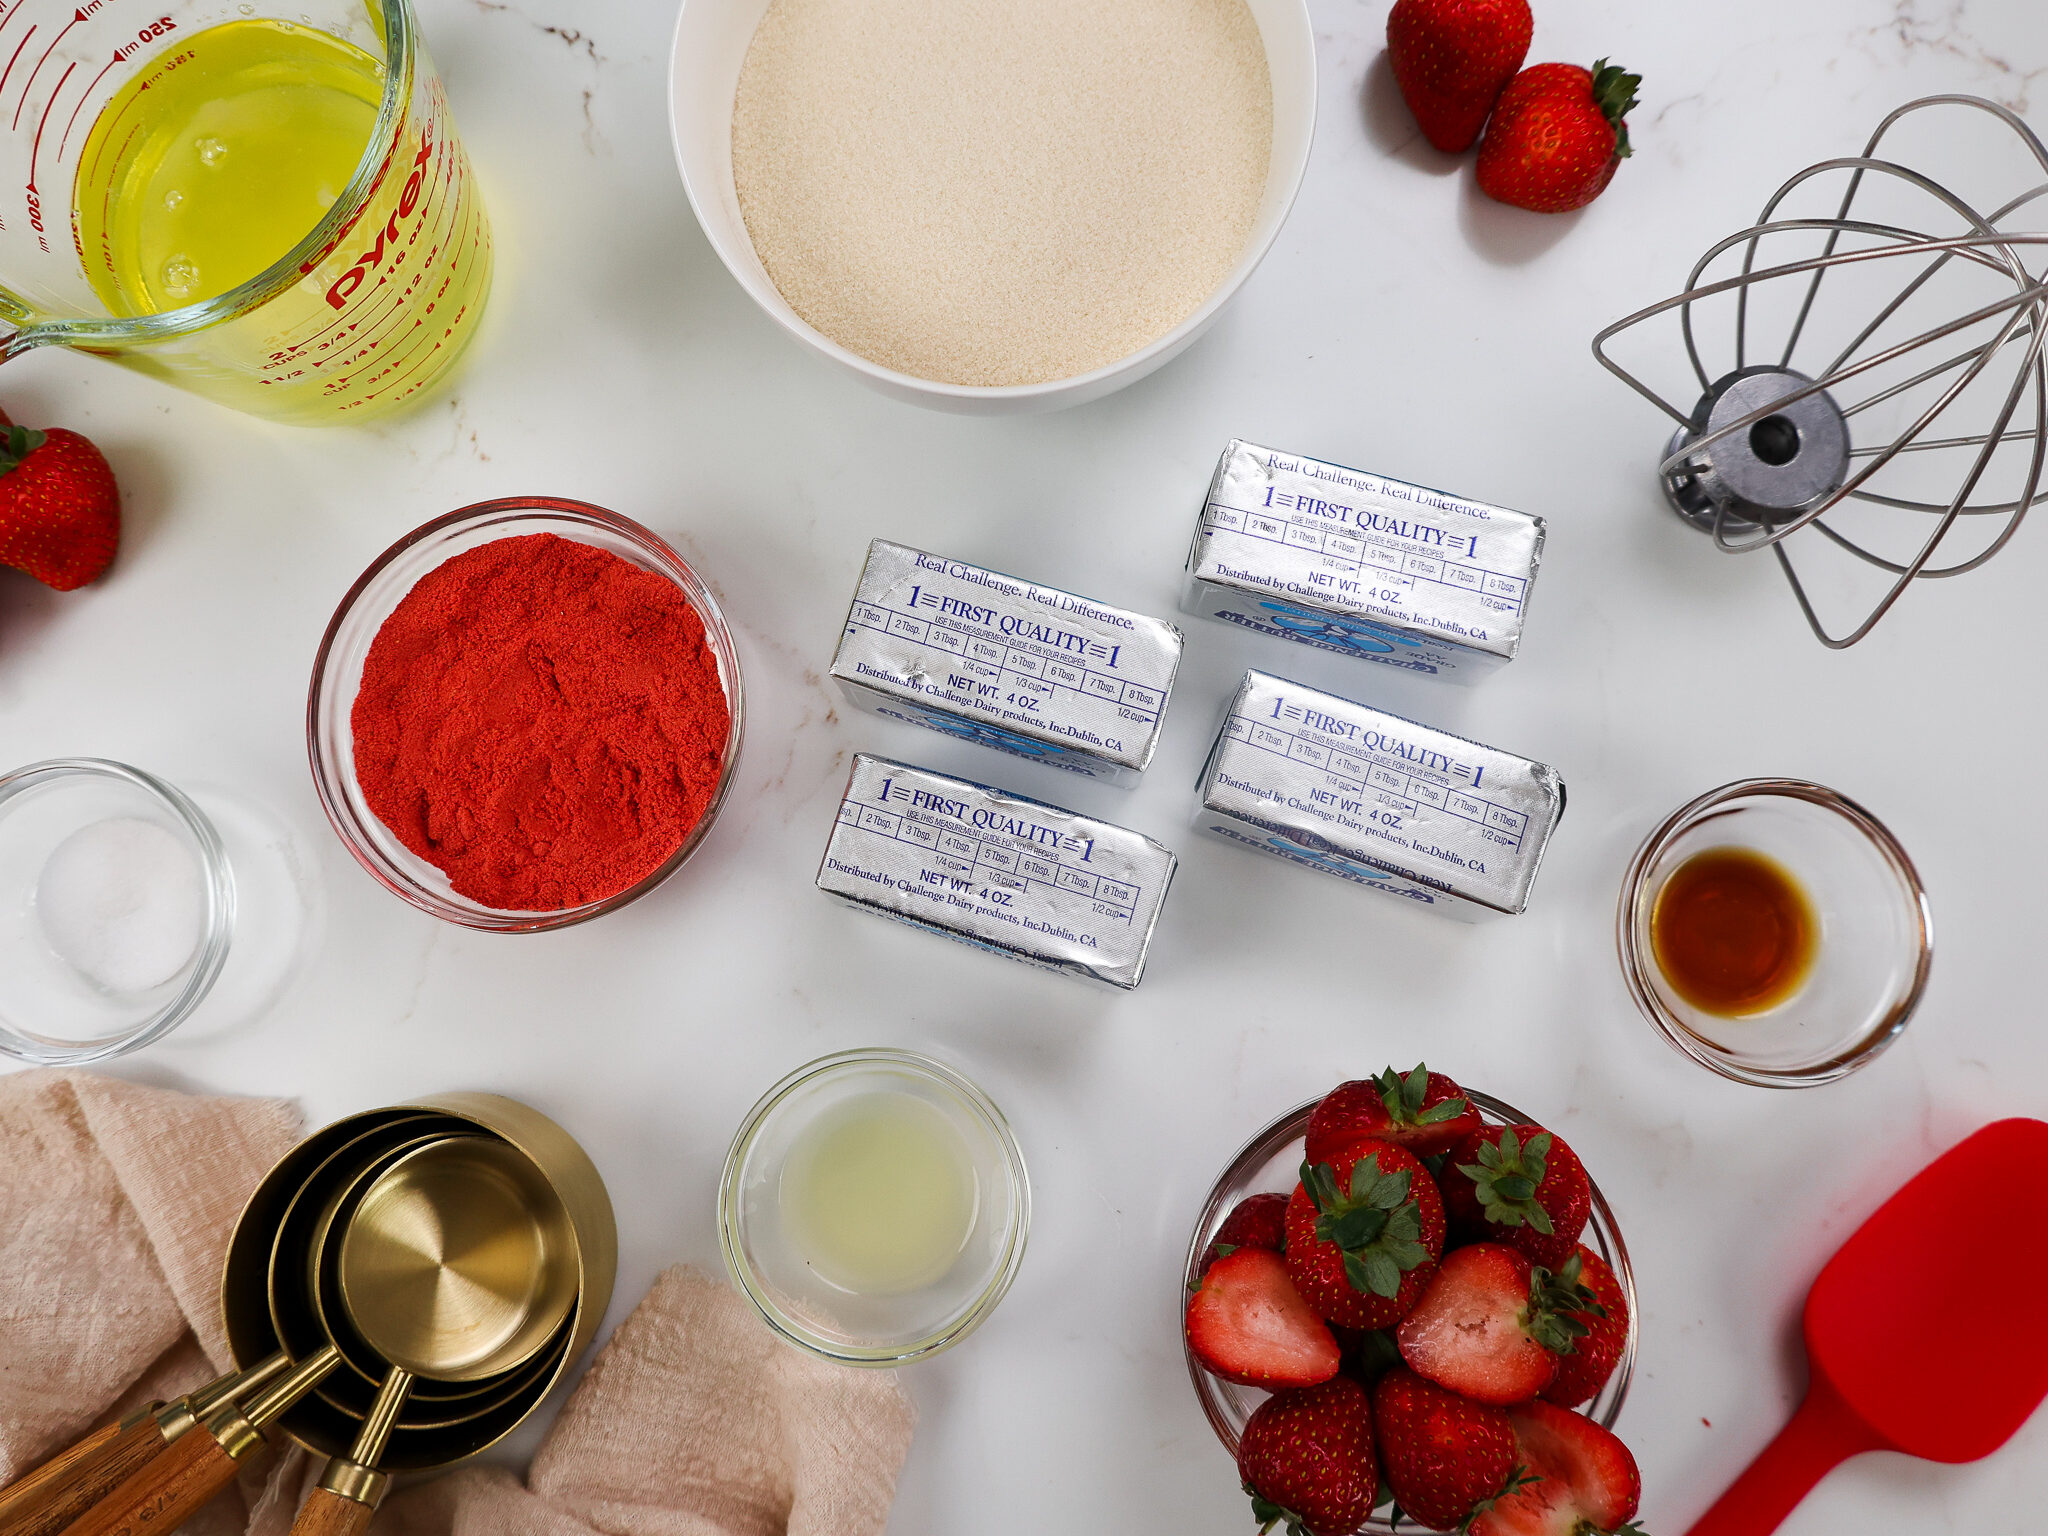 image of ingredients laid out to make strawberry Swiss meringue buttercream